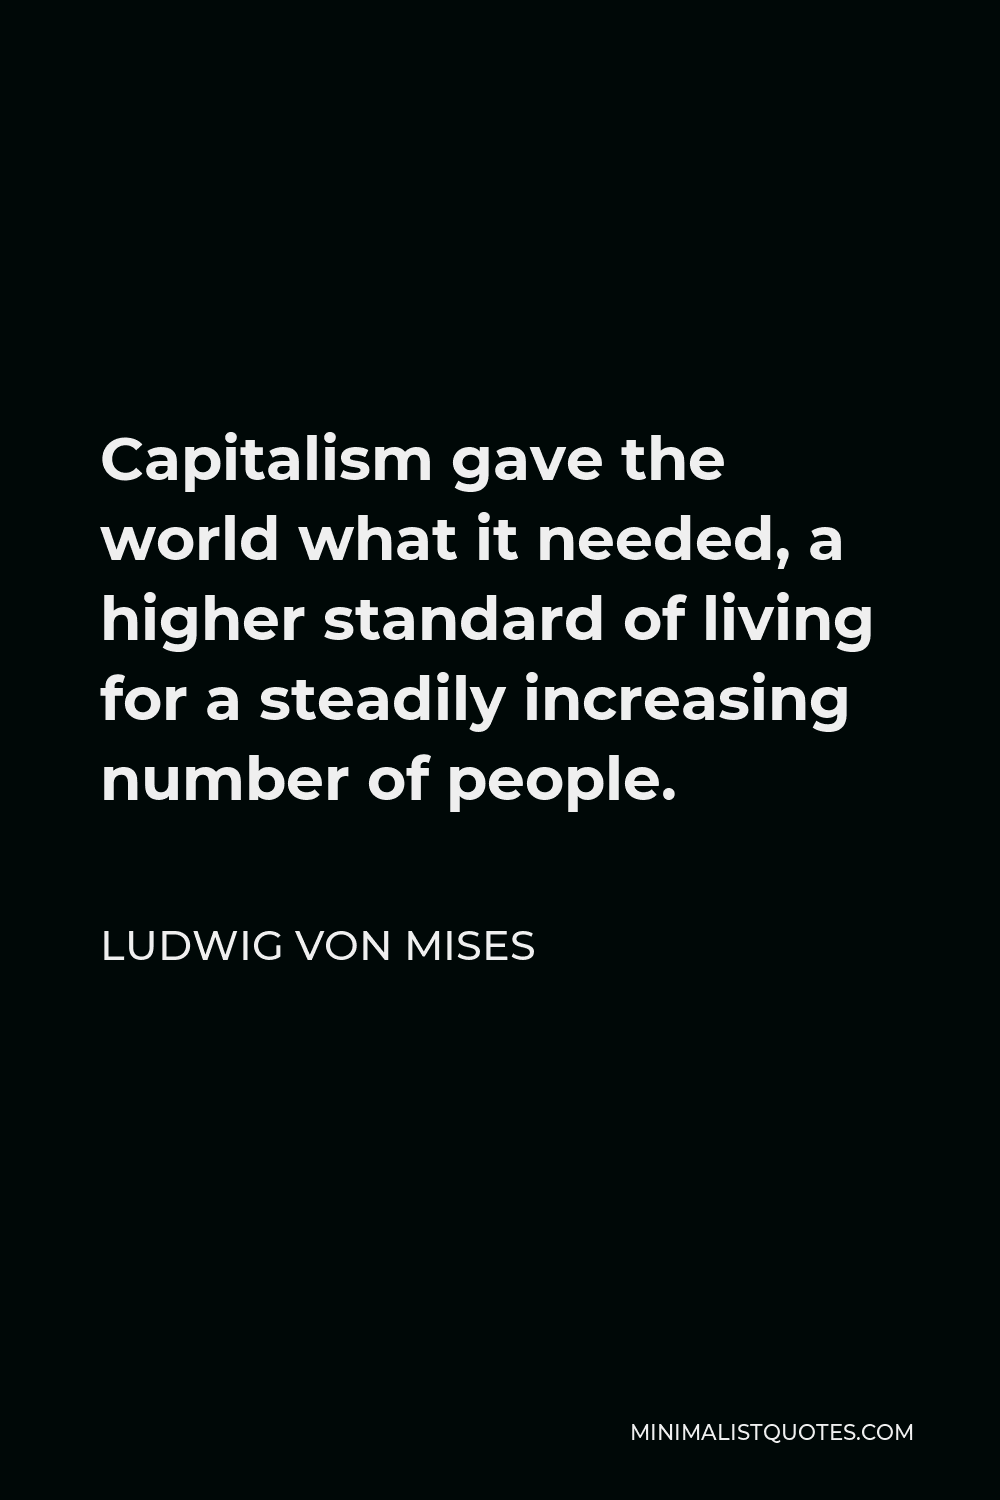 Ludwig von Mises Quote - Capitalism gave the world what it needed, a higher standard of living for a steadily increasing number of people.